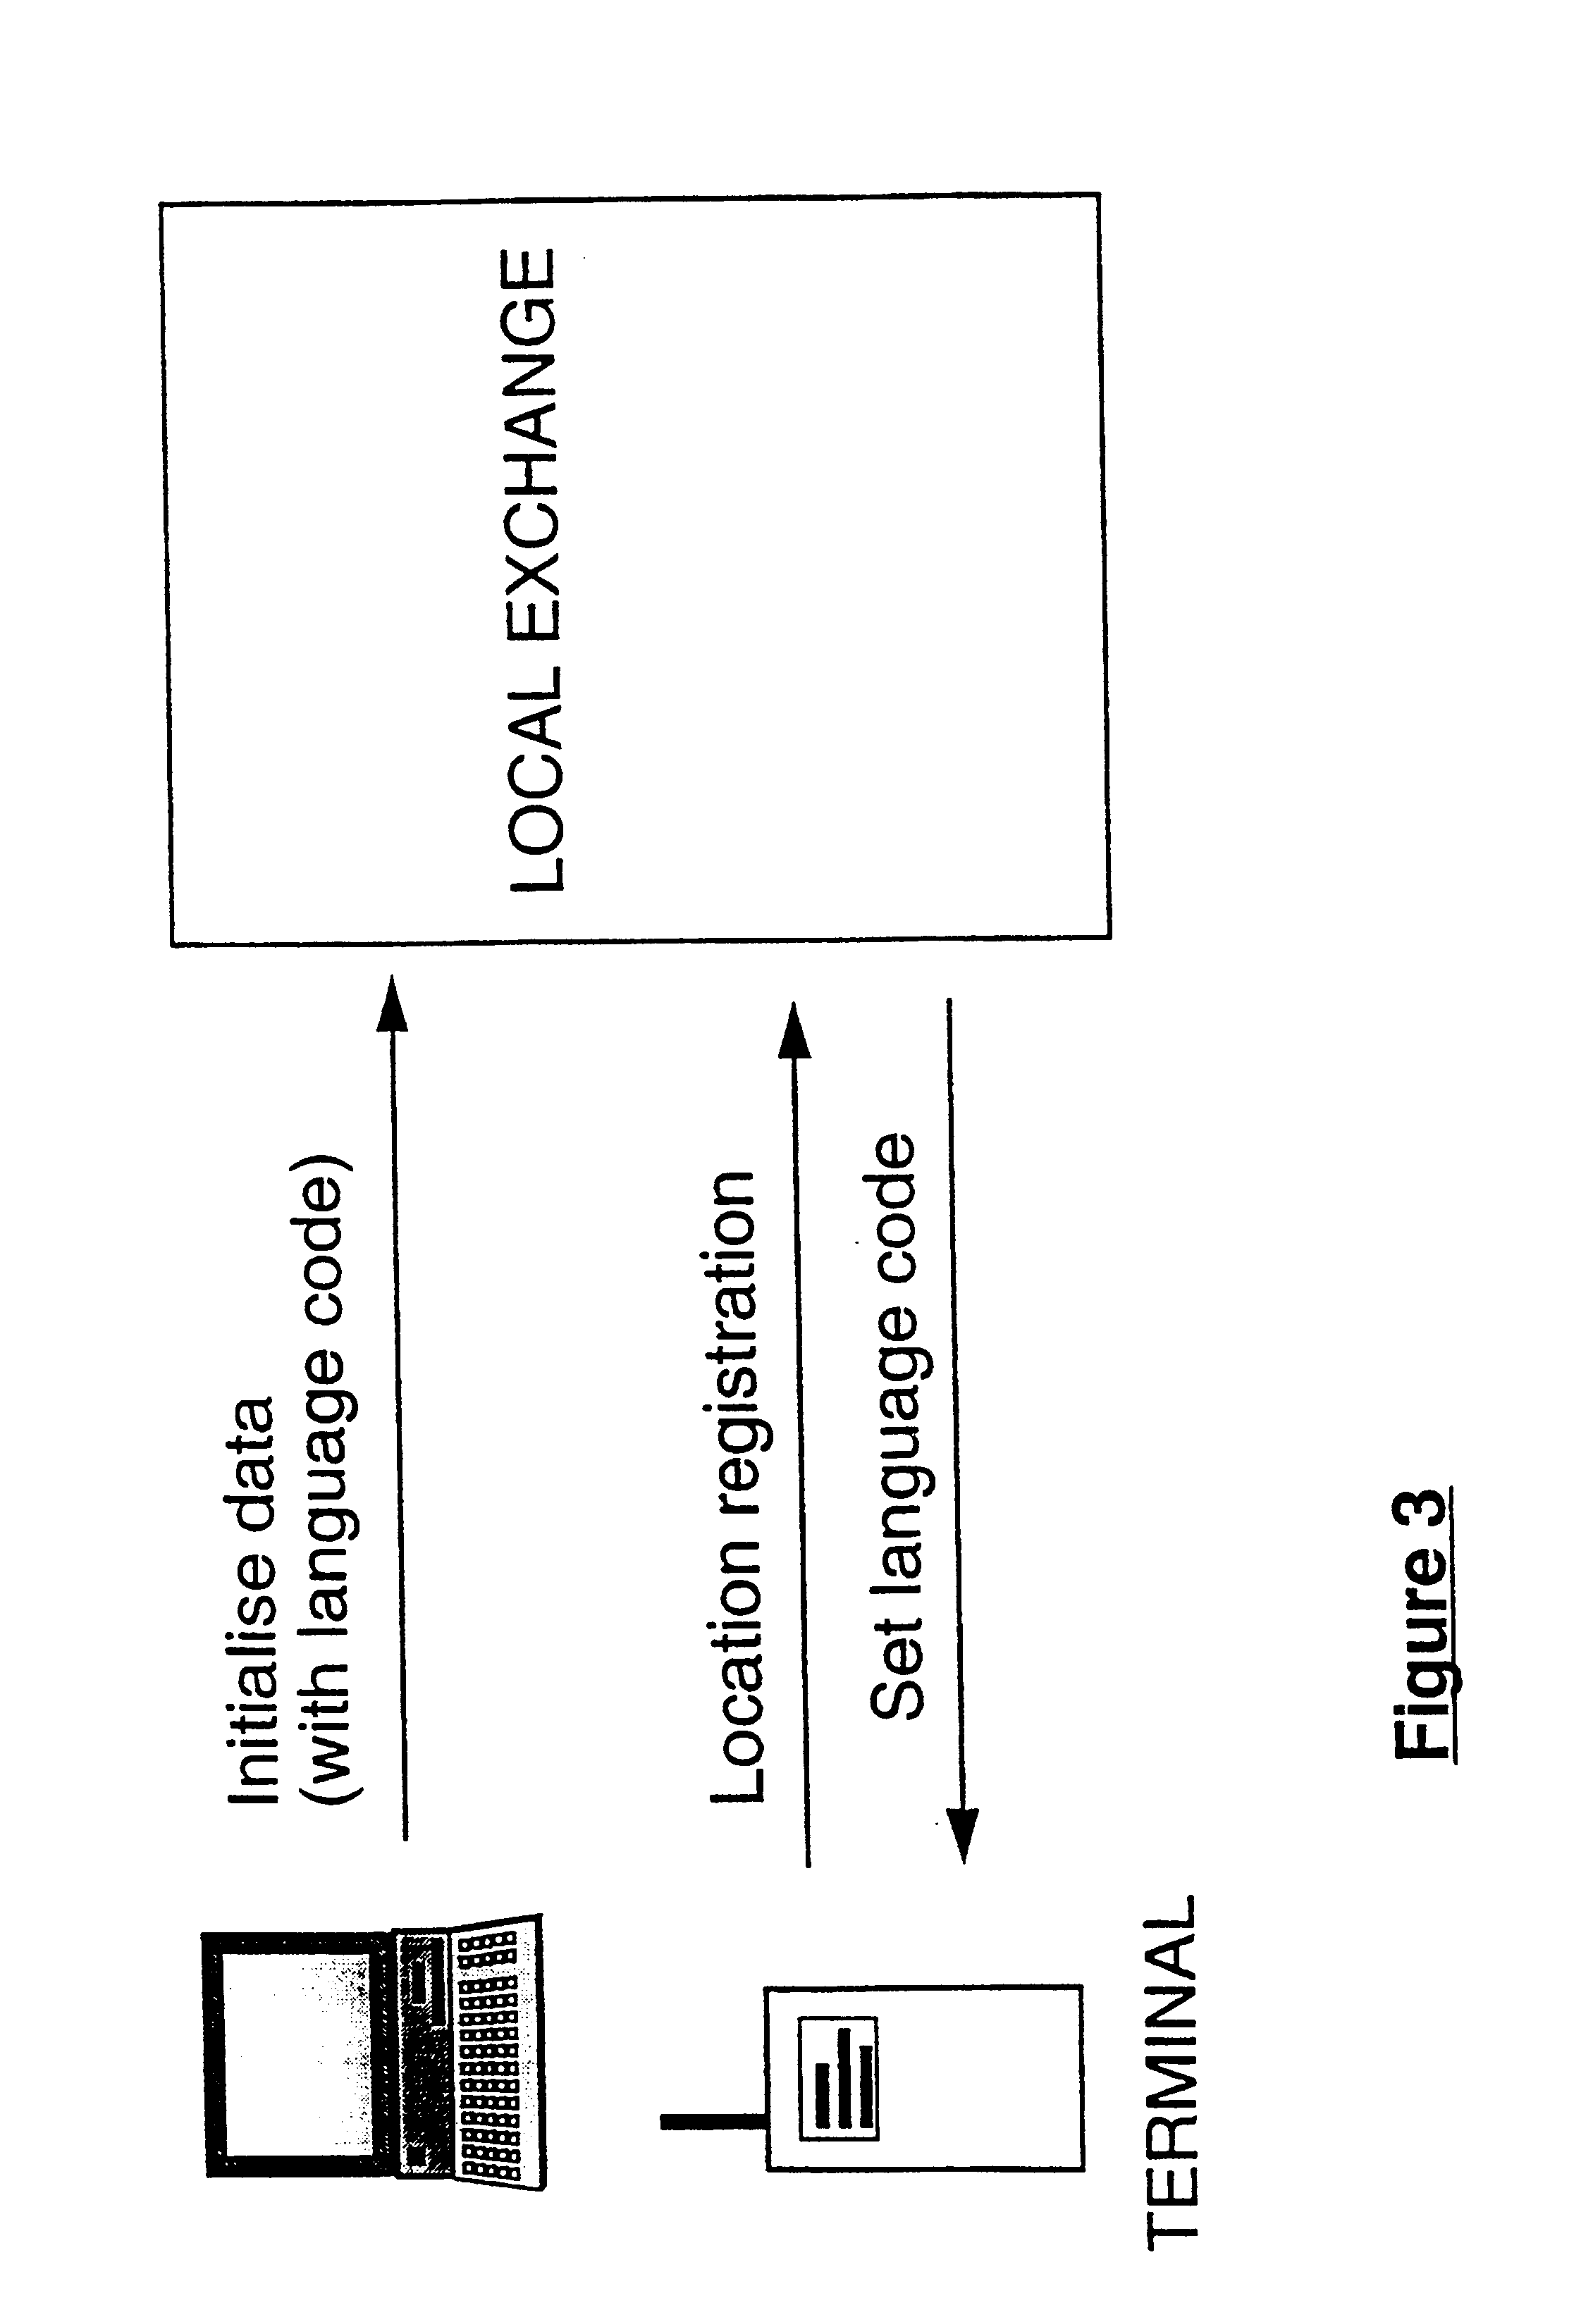 Method for passing information between a local exchange and a user/terminal